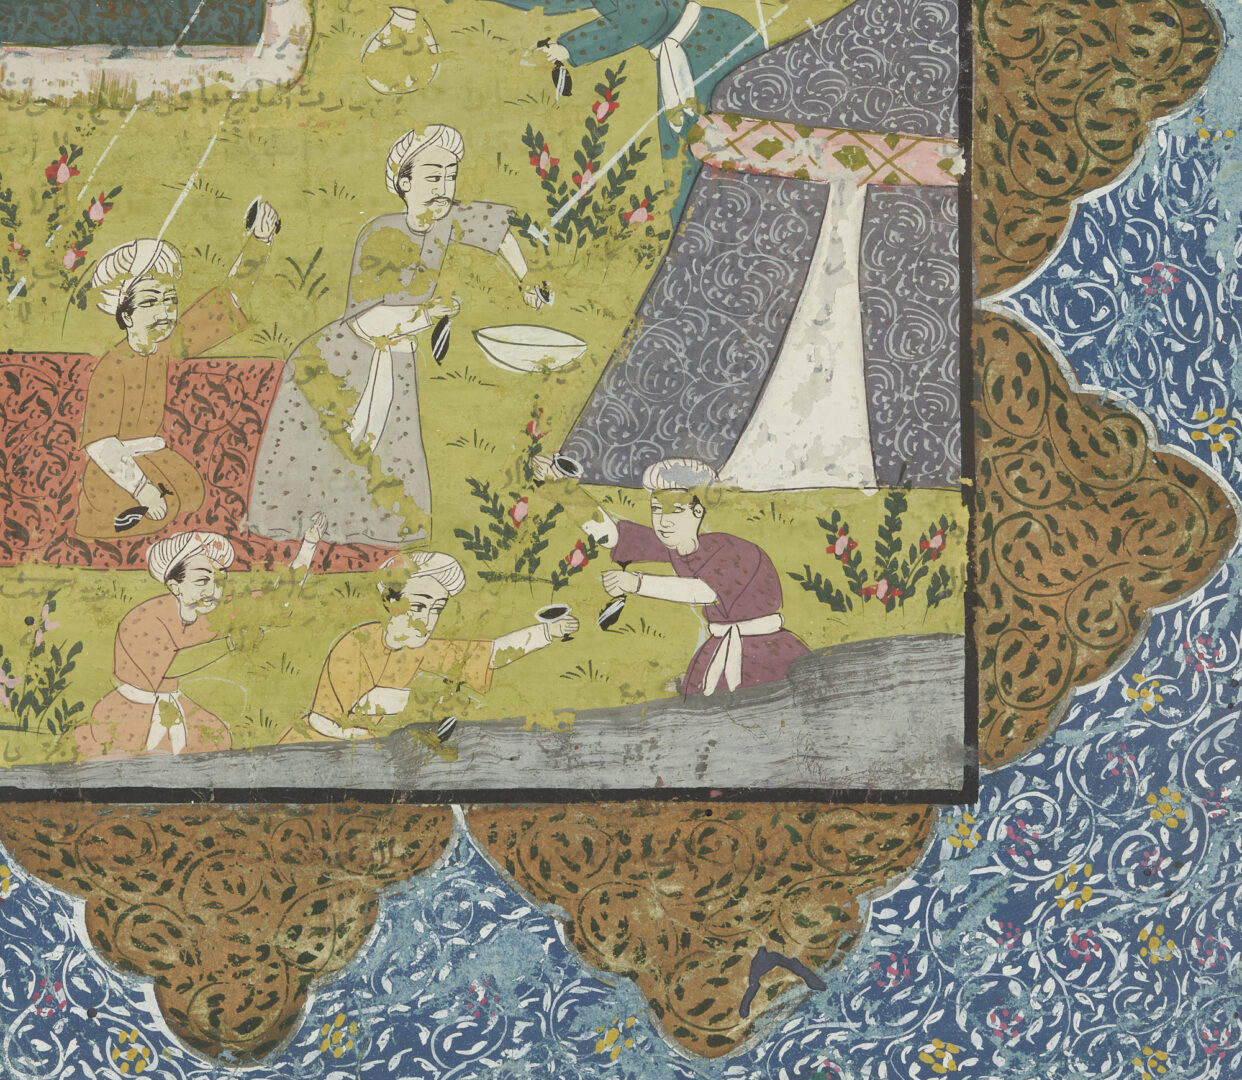 Lot 209: Collection of Indian / Middle Eastern Paintings in 4 frames